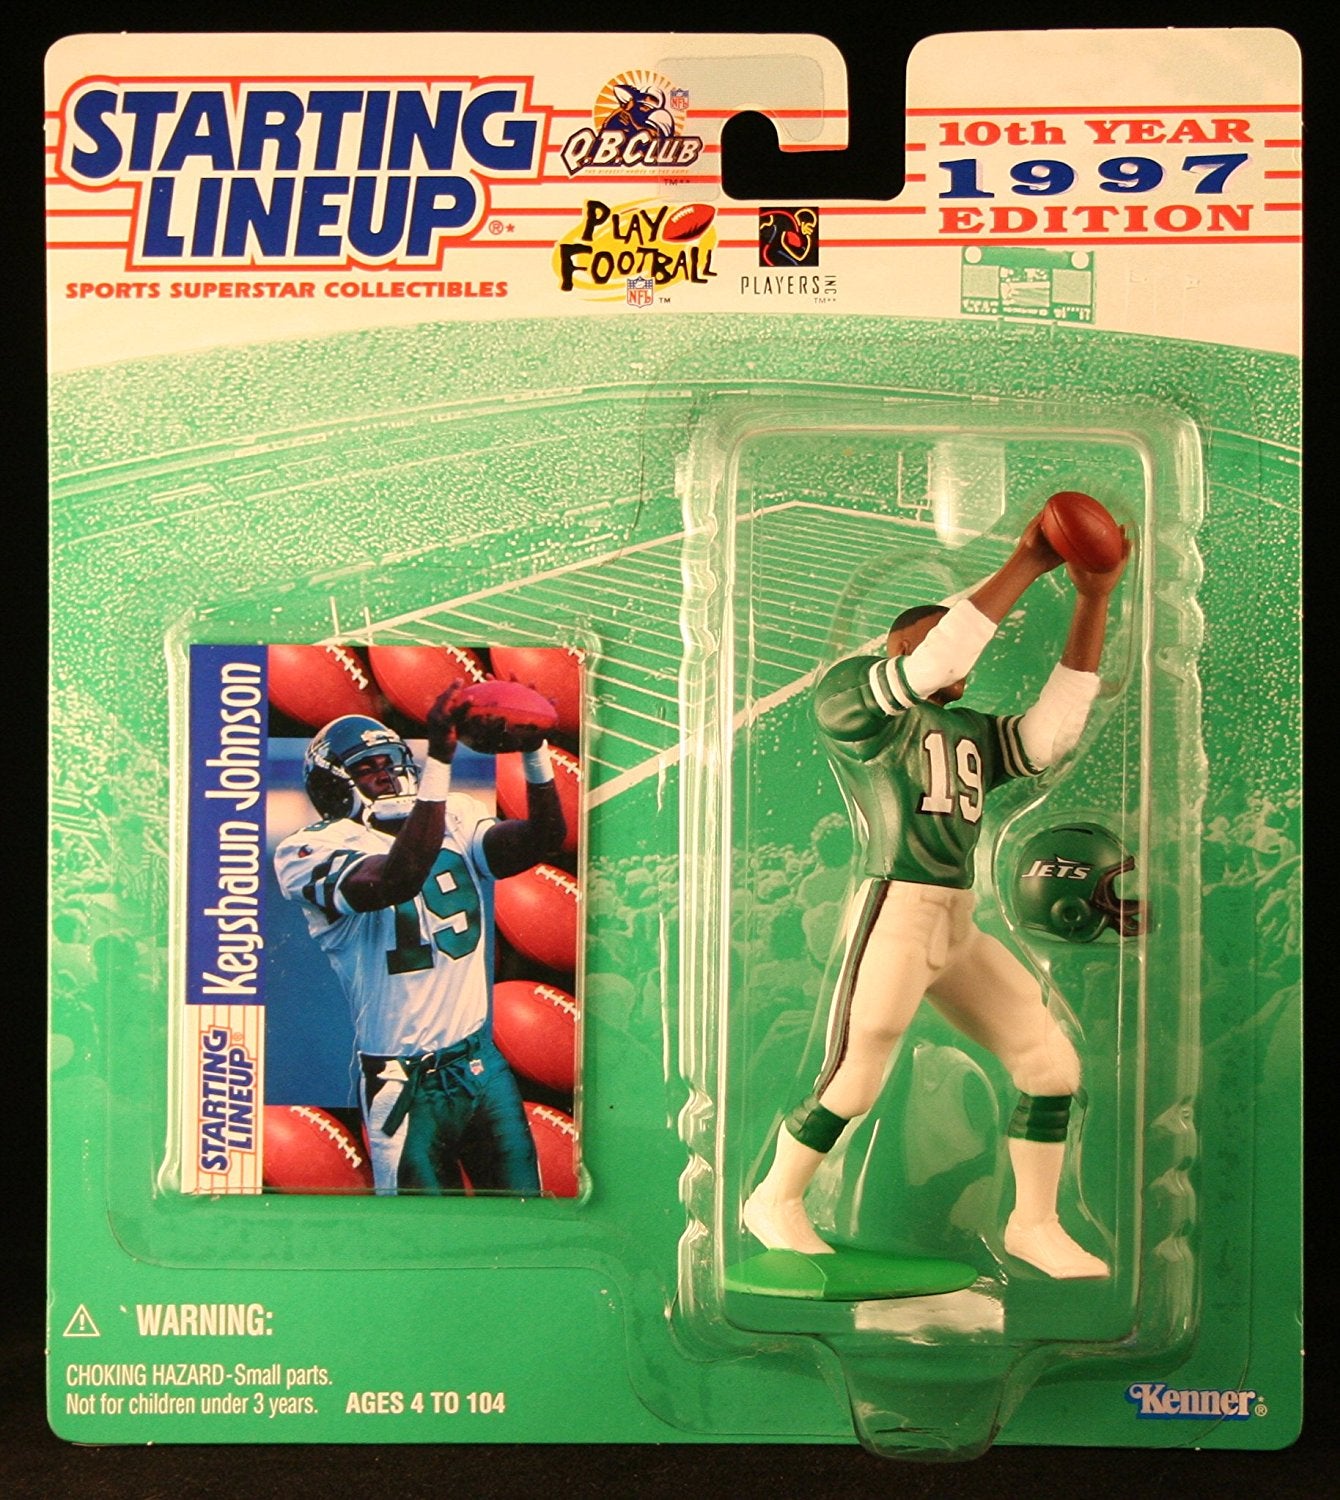 KEYSHAWN JOHNSON / NEW YORK JETS 1997 NFL Starting Lineup Action Figure & Exclusive NFL Collector Trading Card